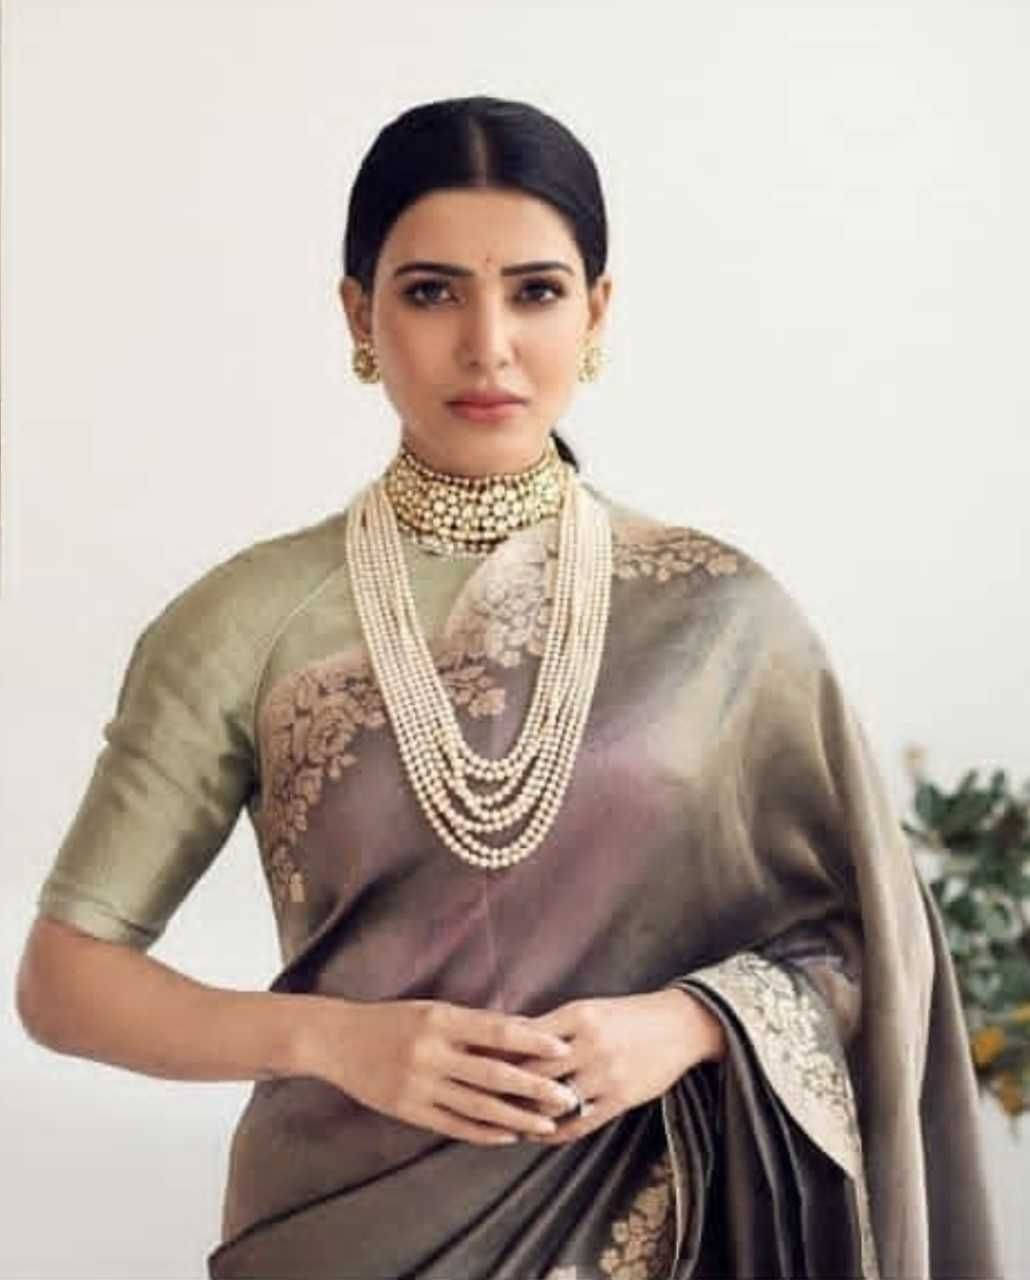 Samantha Saree With Pearl Necklace Wallpaper